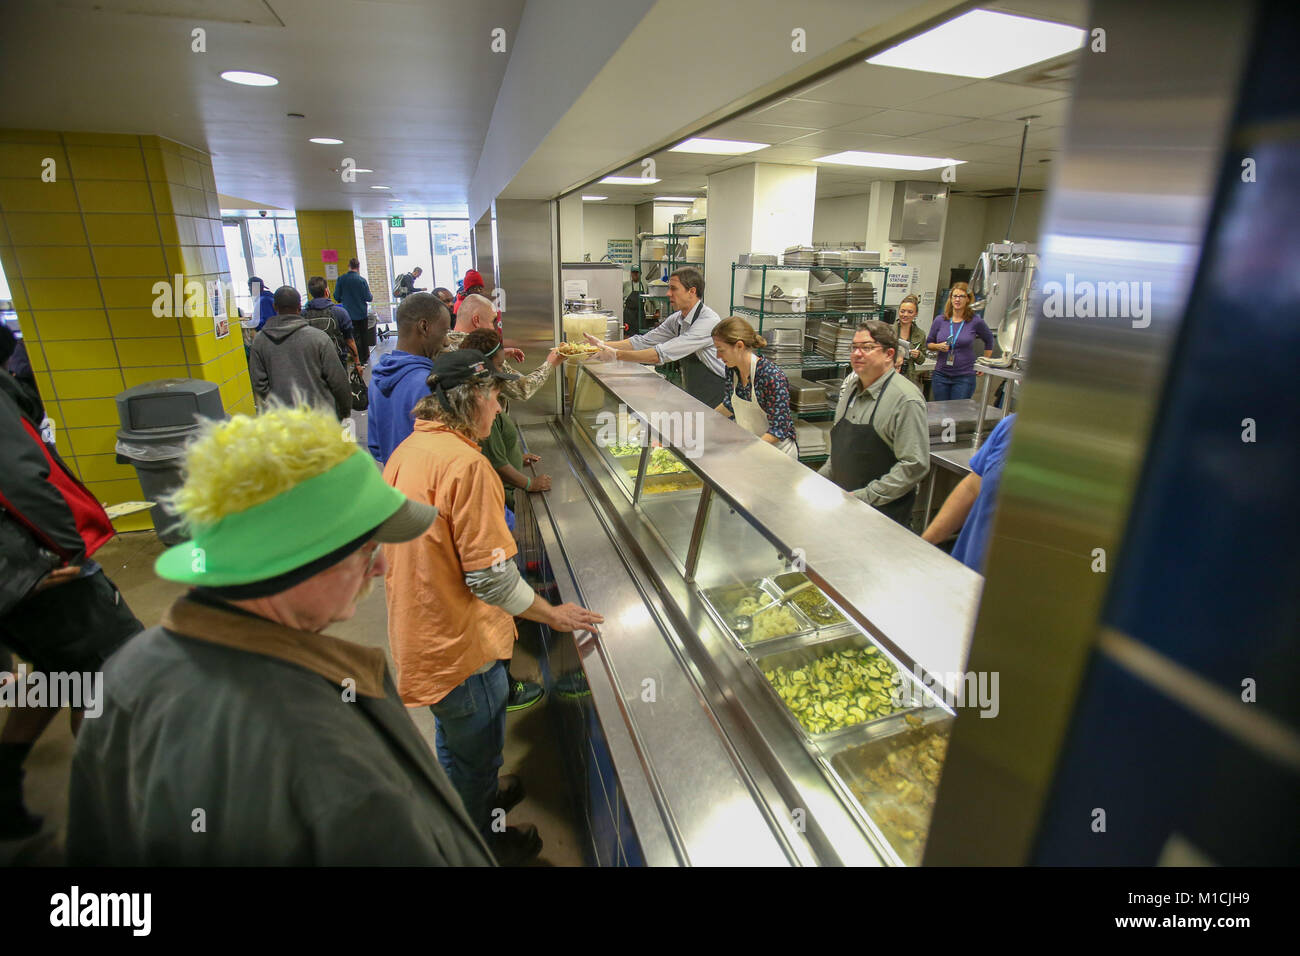 Houston Texas Usa 28th January 18 Beto O Rourke D Texas Serves A Warm Meal At The Beacon Homeless Shelter In Houston Tx John Glaser Csm Alamy Live News Stock Photo Alamy